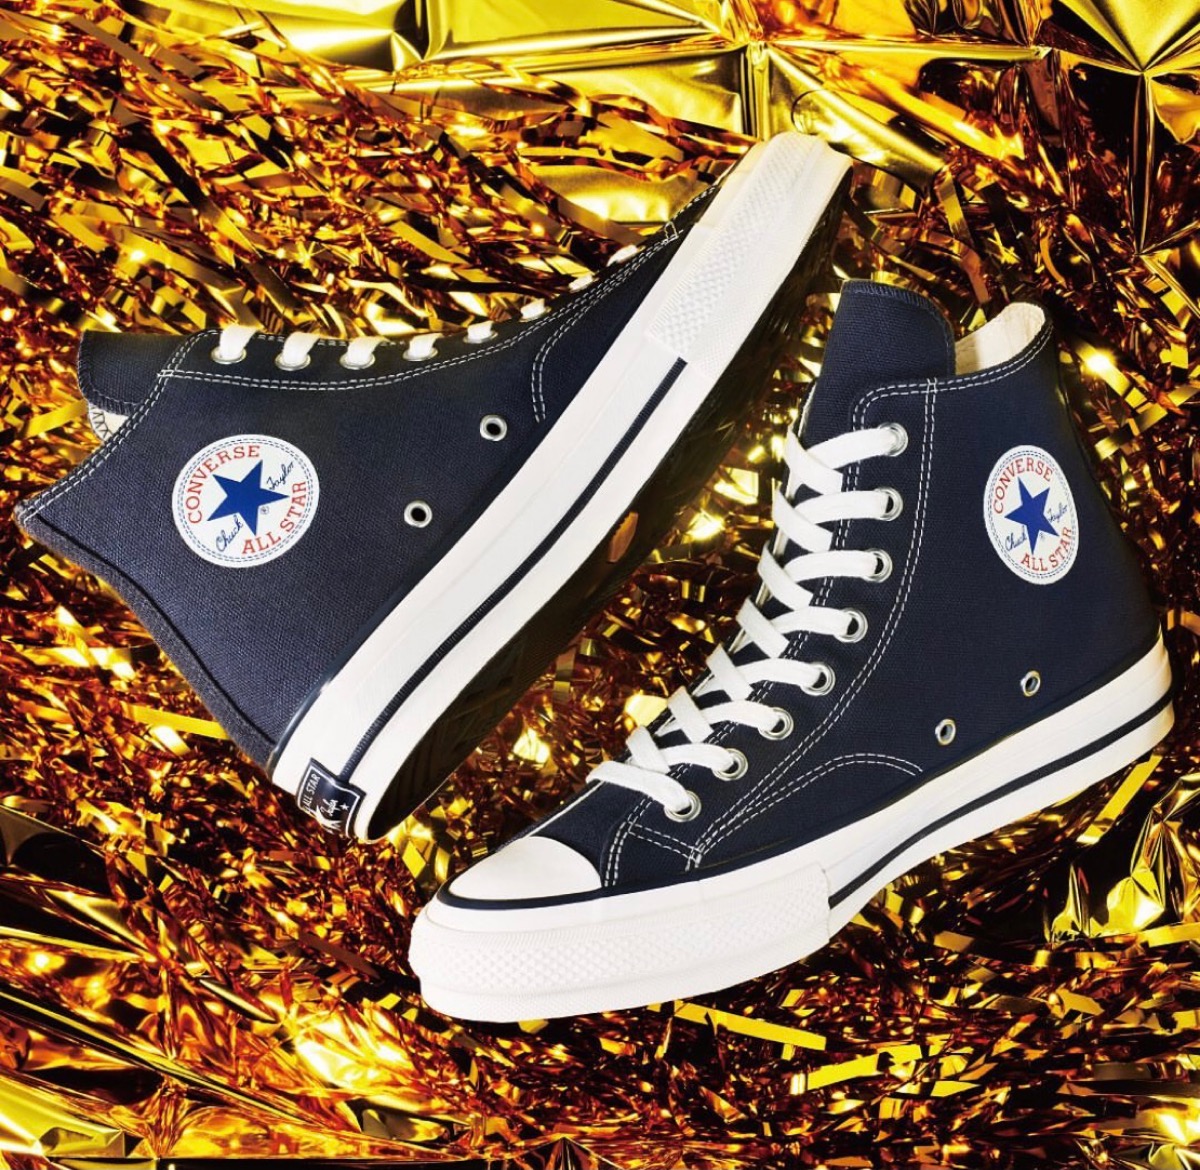 CONVERSE ADDICT 2022 HOLIDAYの新作が国内10月10日より発売 | UP TO DATE